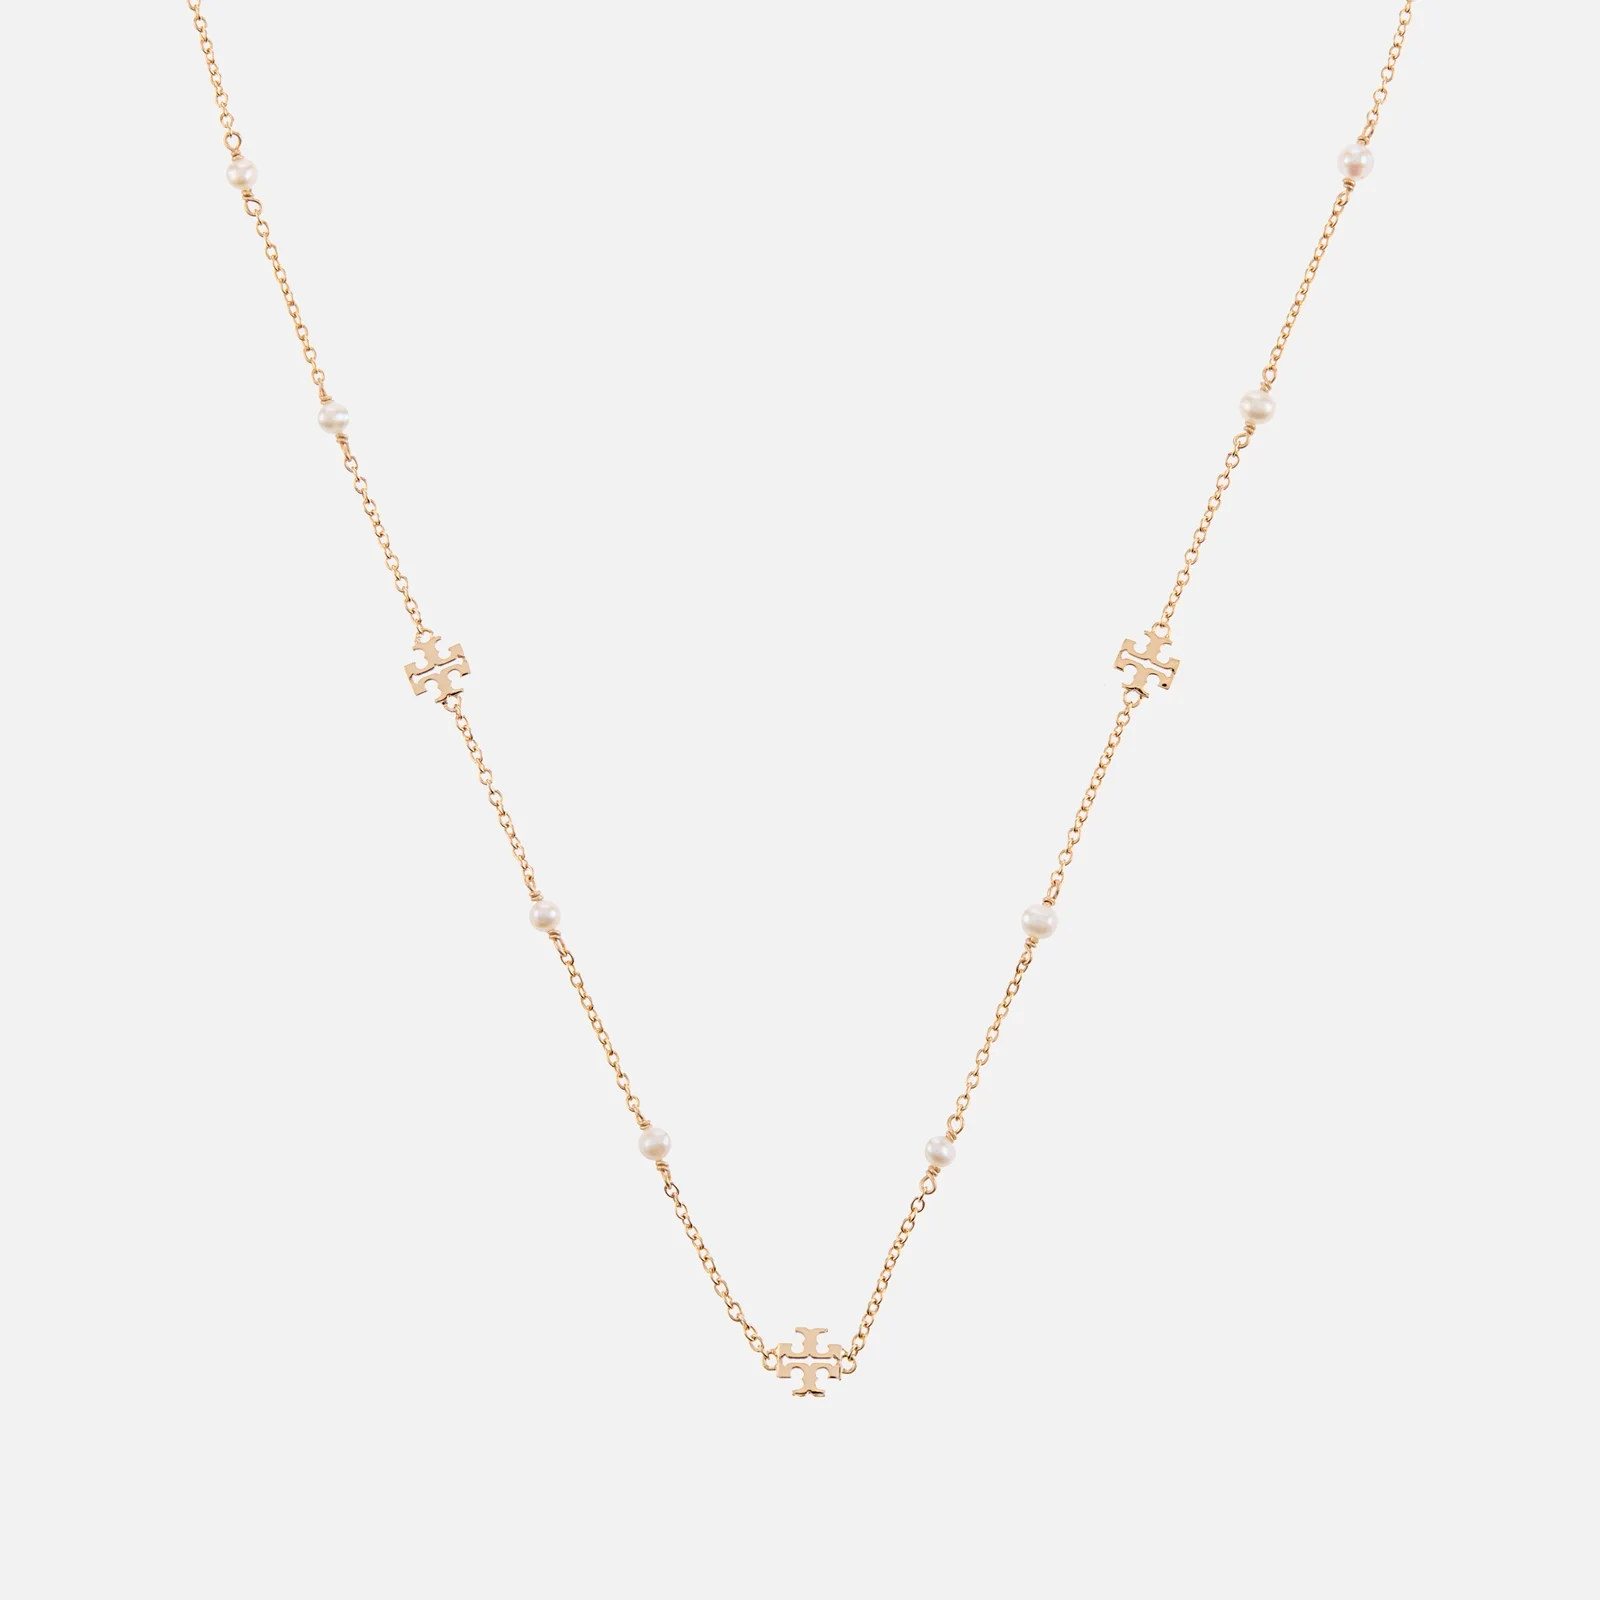 Tory Burch Delicate Kira Pearl Gold-Tone Necklace Image 1